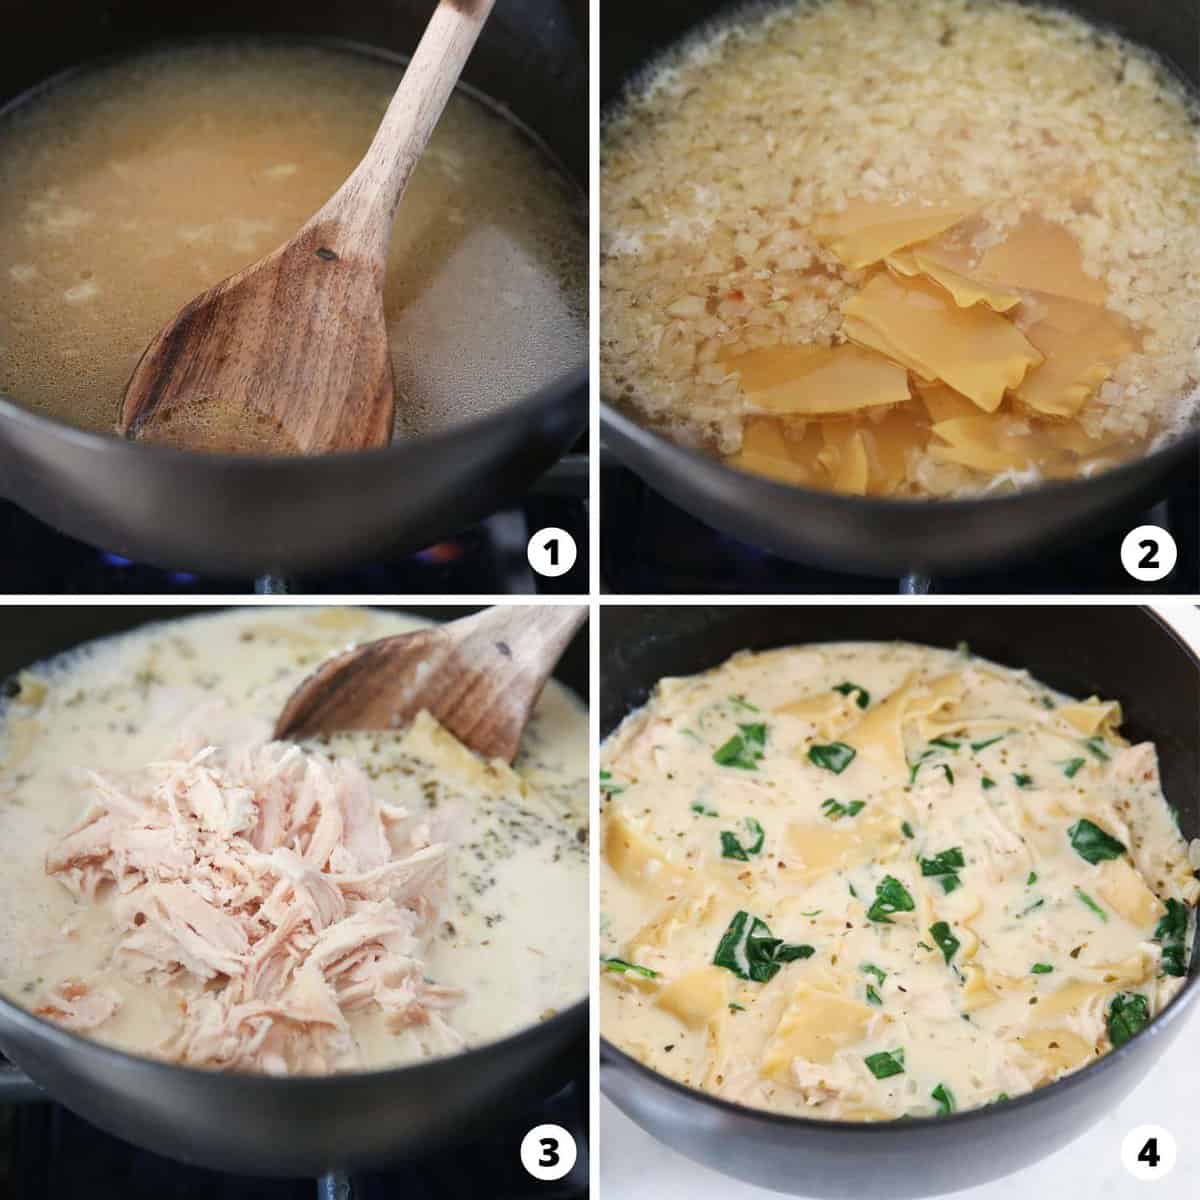 Showing how to make white lasagna soup in a 4 step collage.